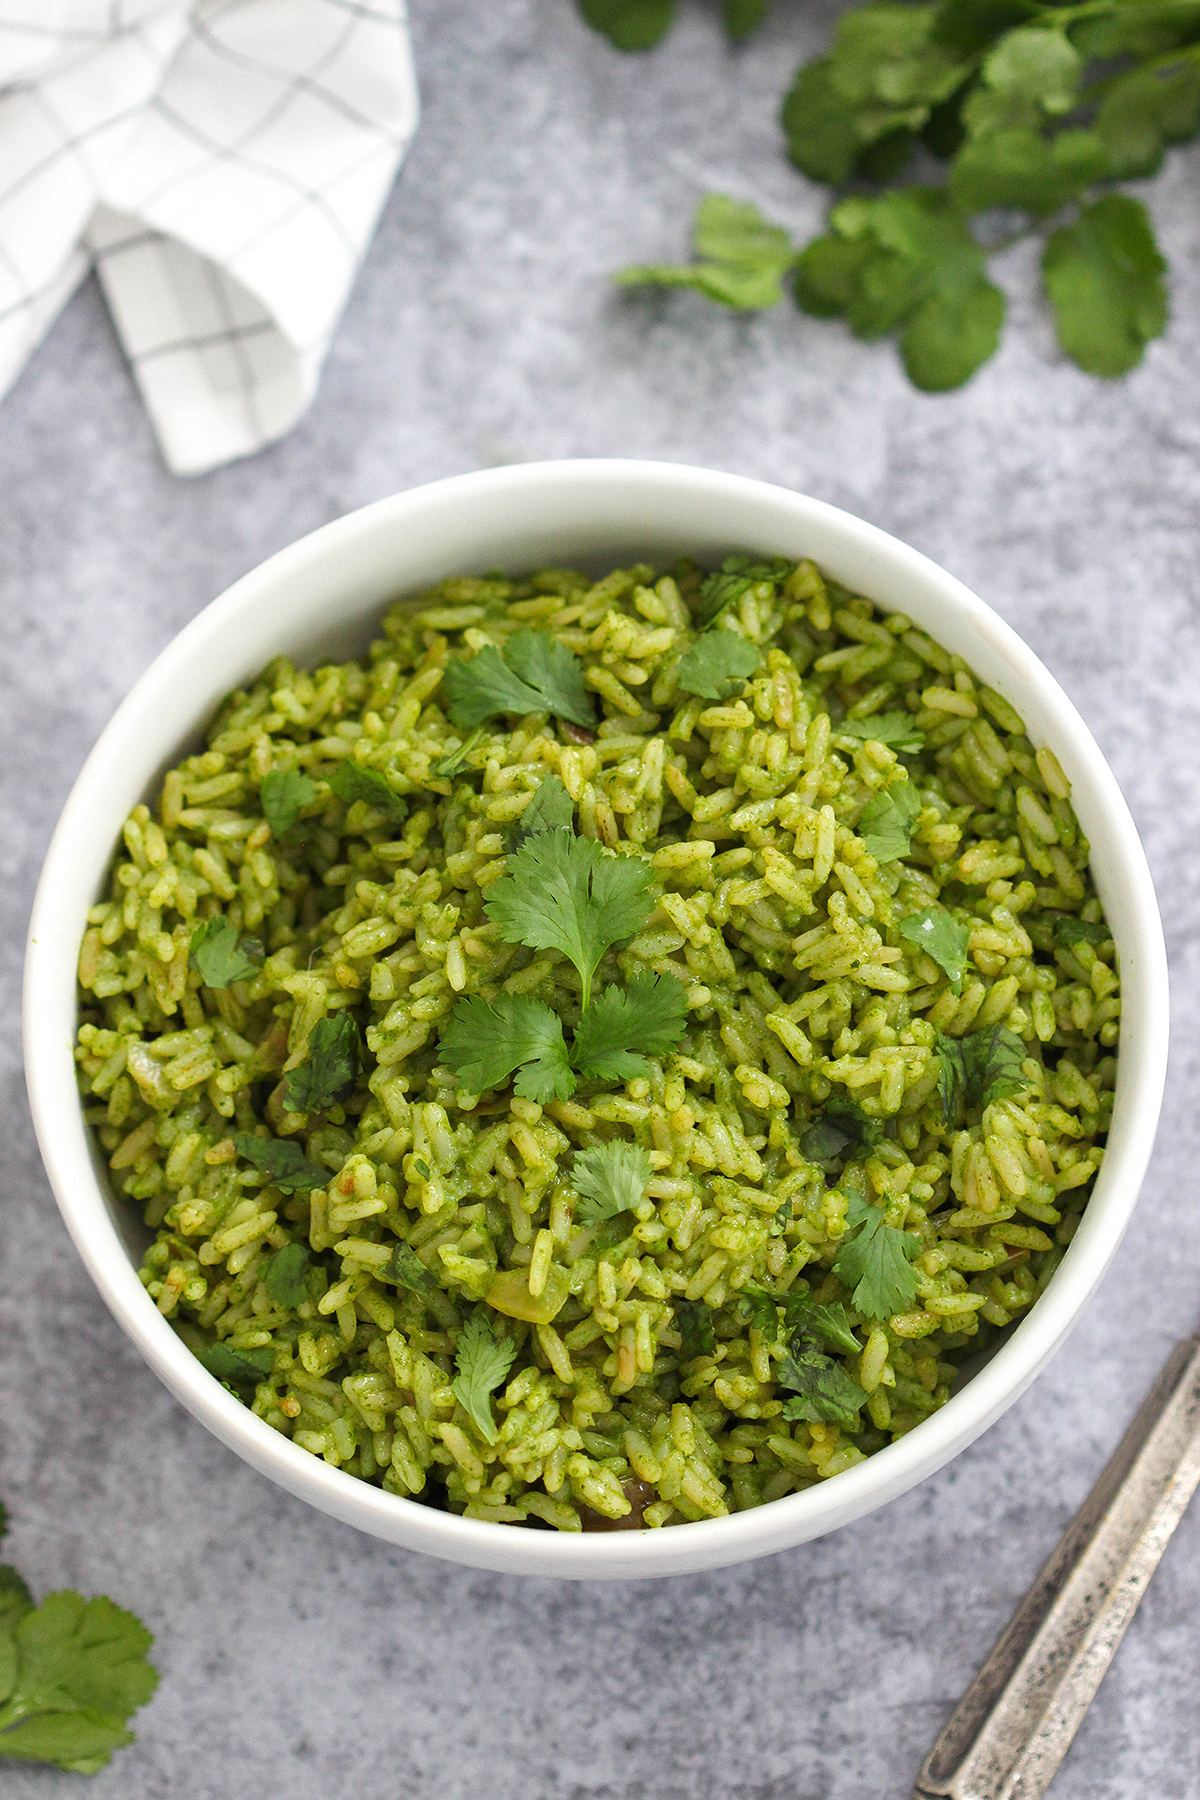 The top 15 Ideas About Mexican Green Rice – Easy Recipes To Make at Home